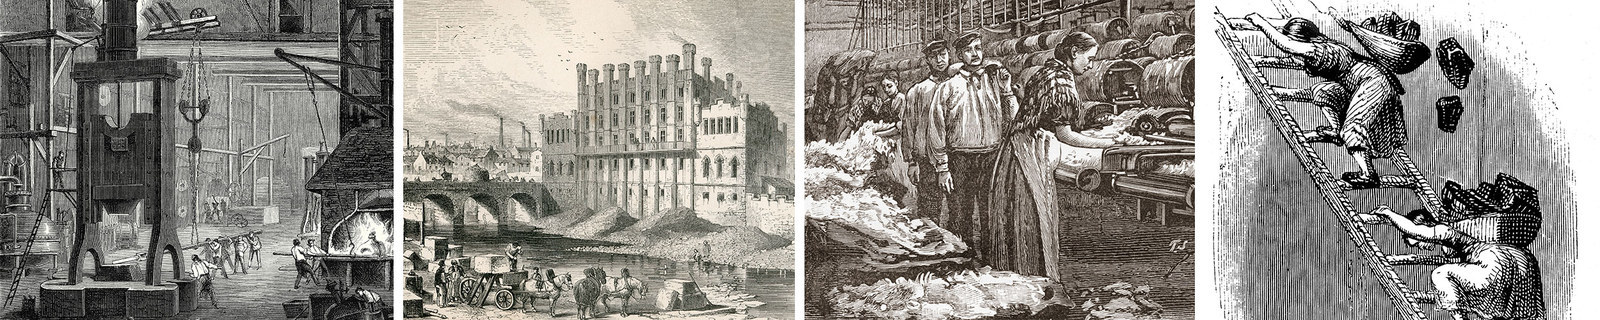 7 Horrifying Workplace Injuries That Will Make You Glad You’re Not Victorian